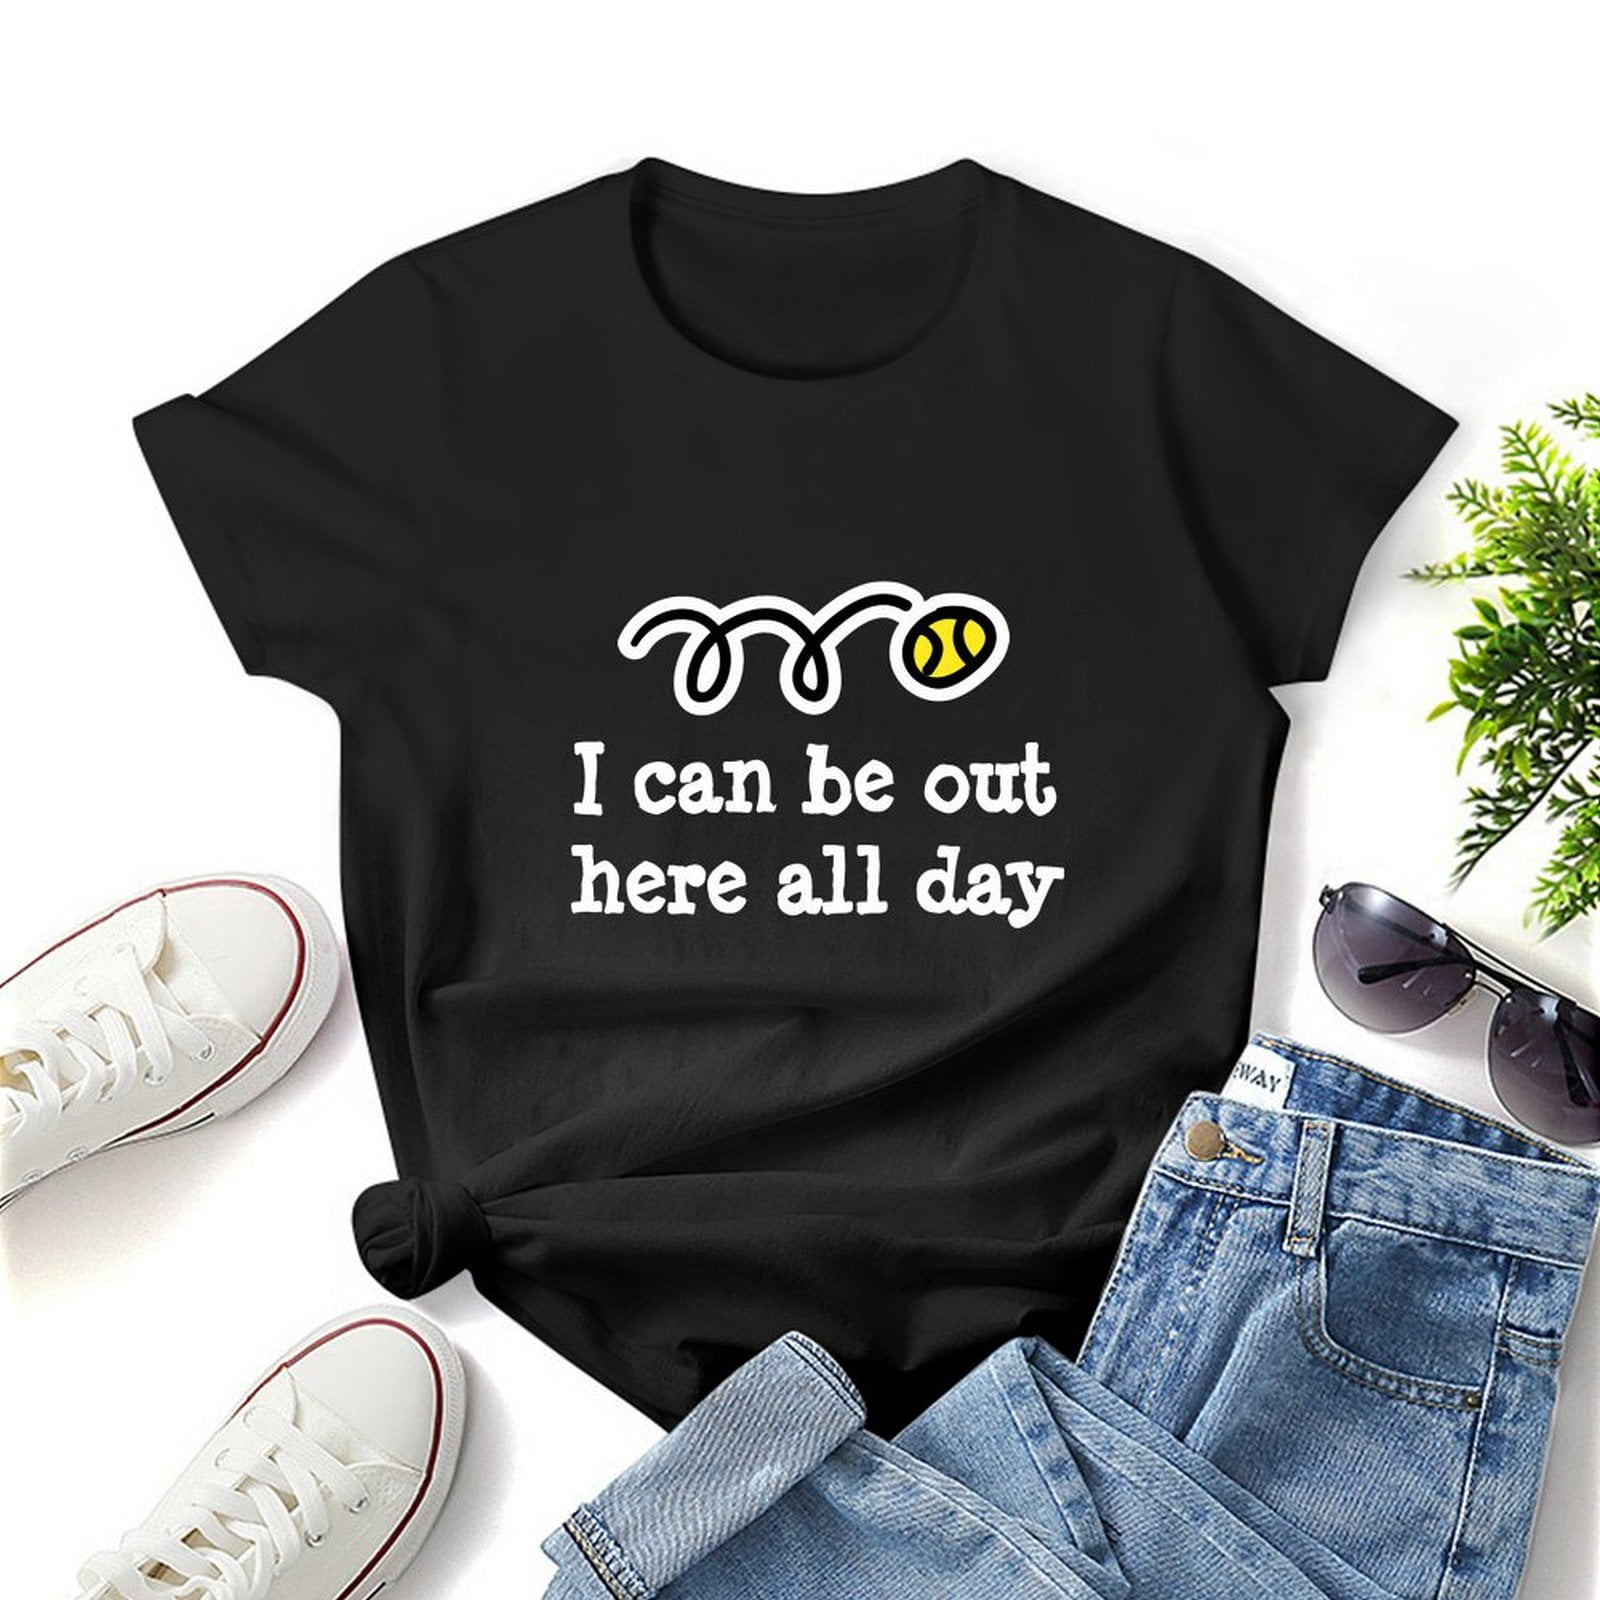 Charlylifestyle Unisex S With Funny Tennis Slogans Sayings Jokes Short ...